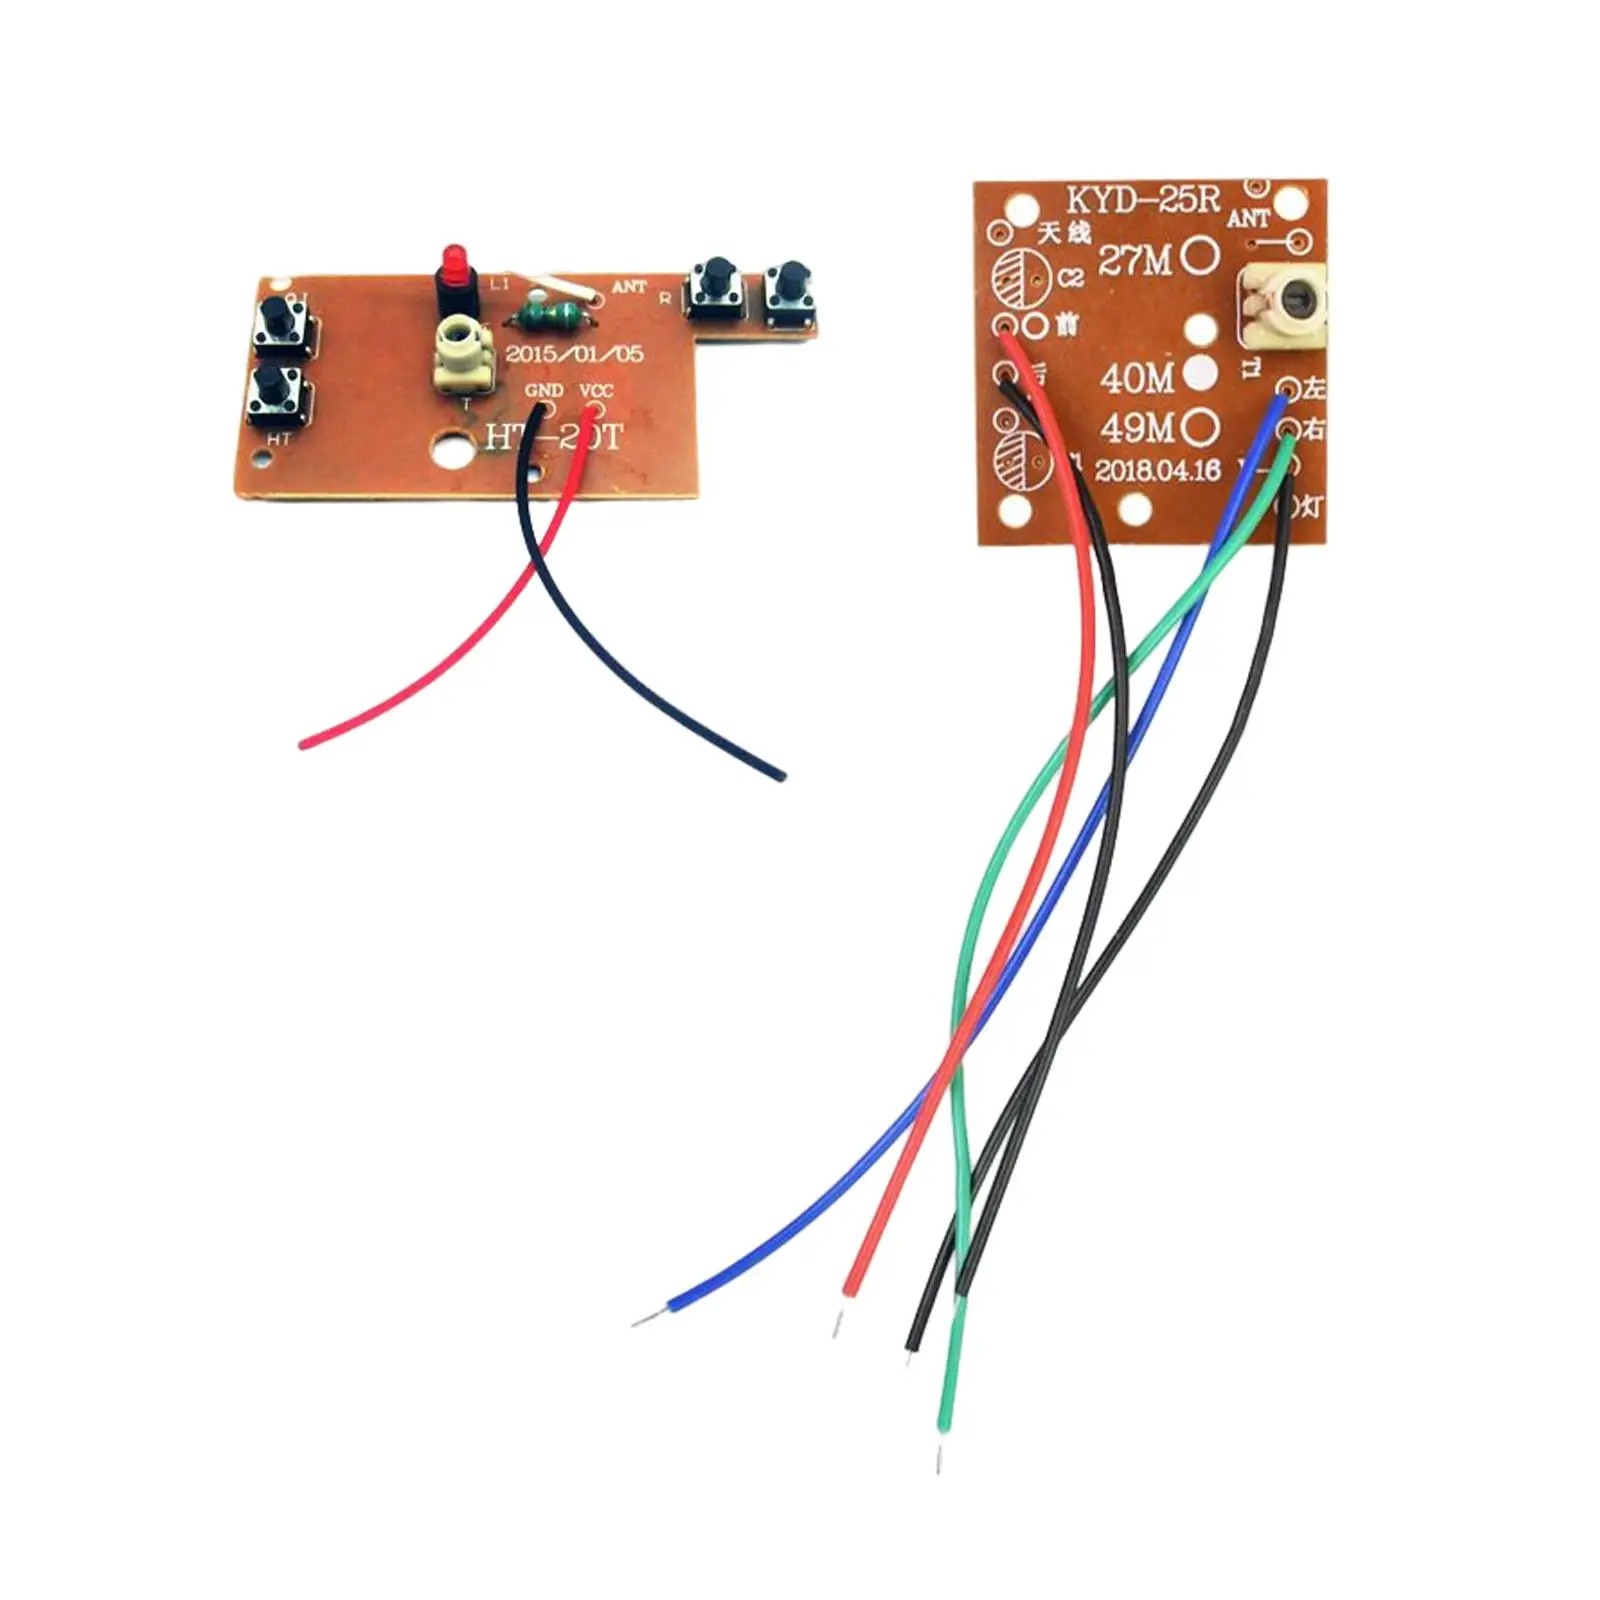 Transmitter Board and Receiver Board for Remote Control Car Replacement